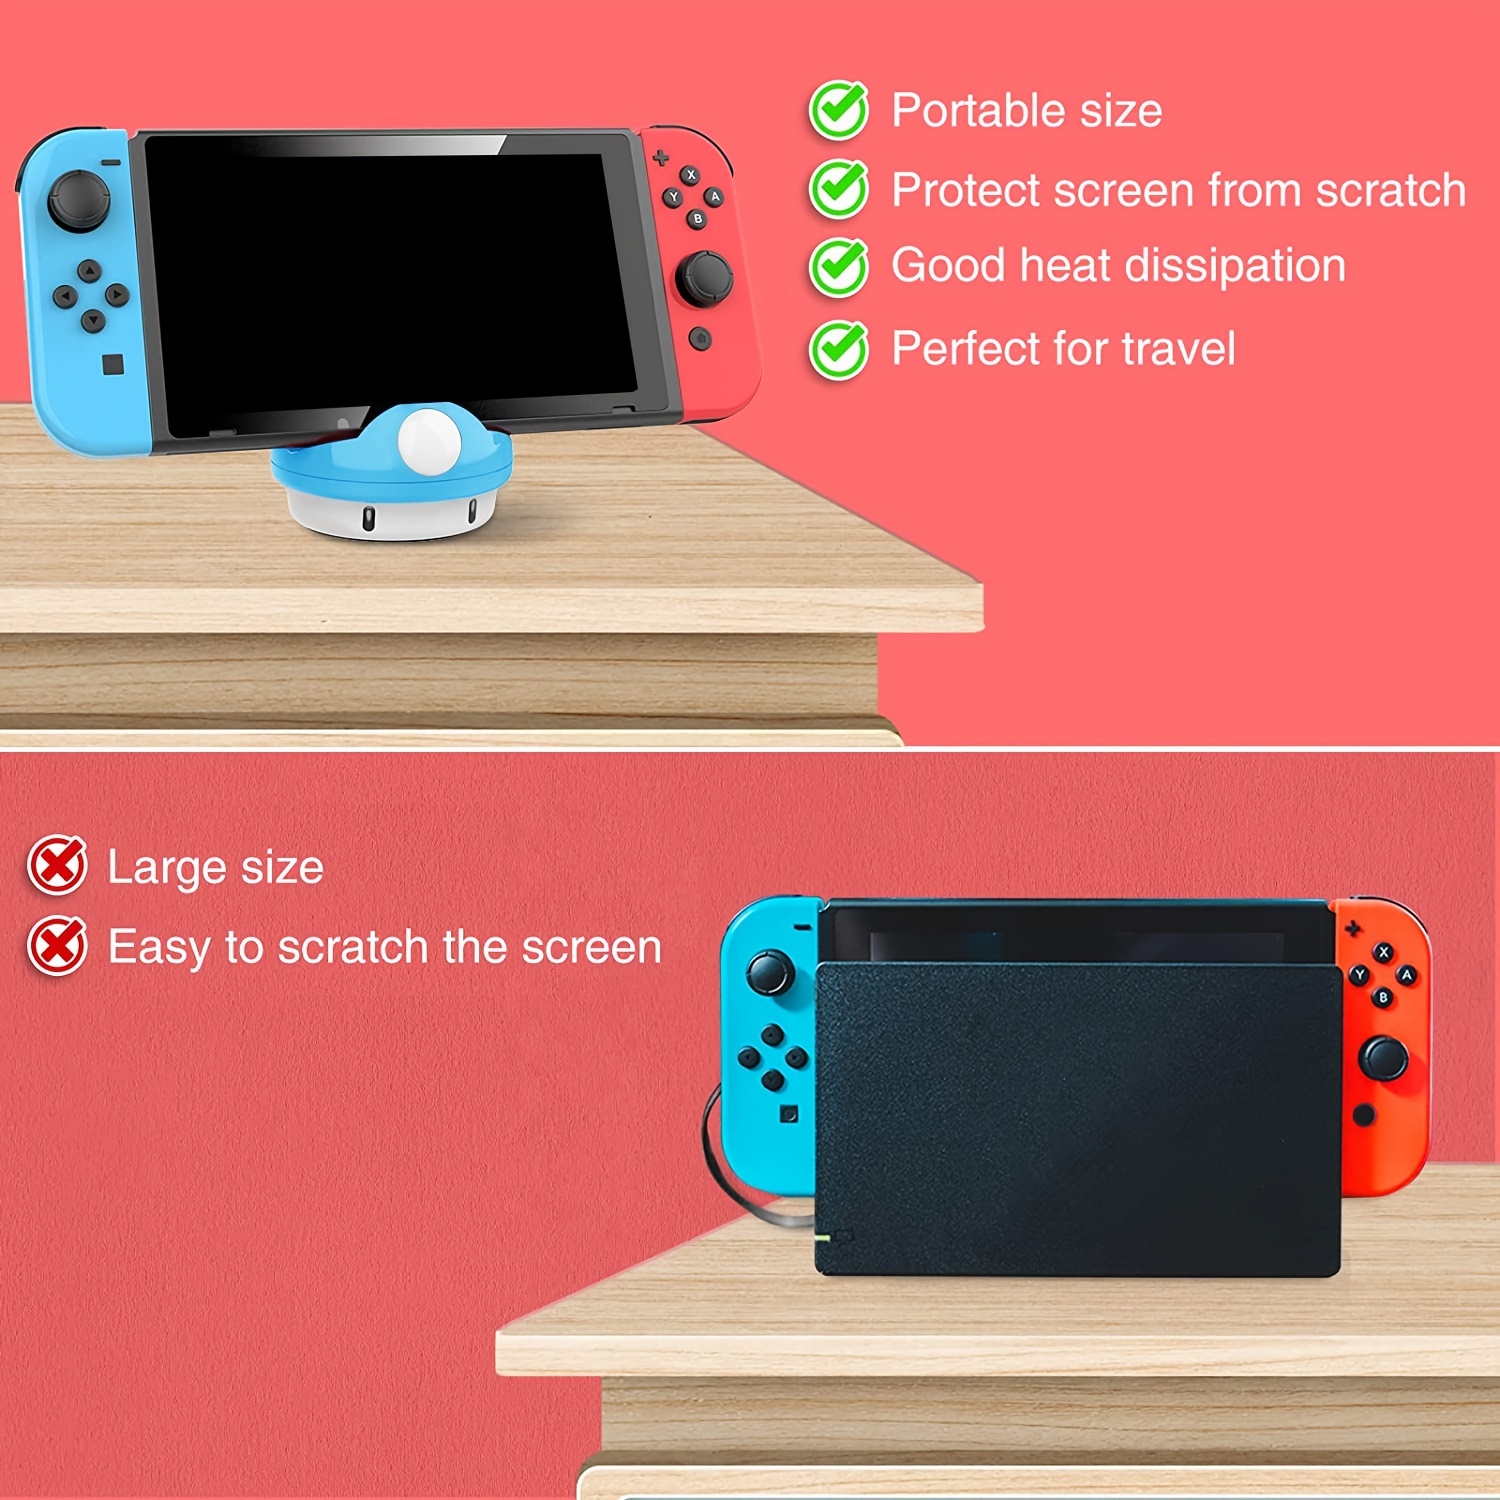  Switch Dock for Nintendo Switch/Switch OLED,Portable